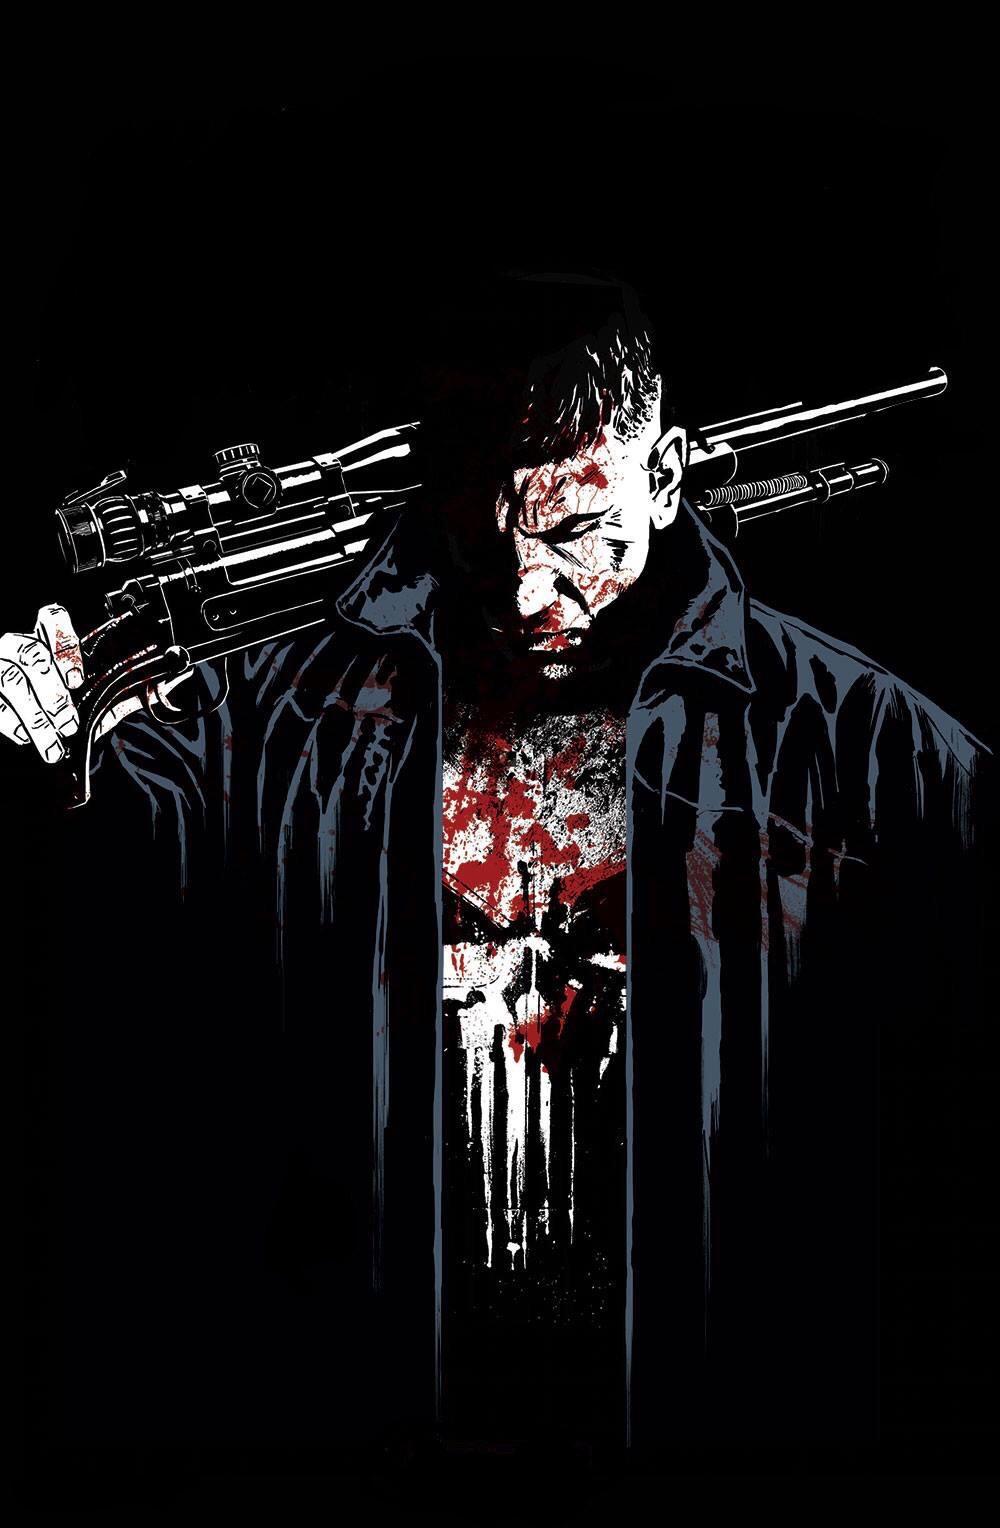 I took out the logos on The Punisher Comic